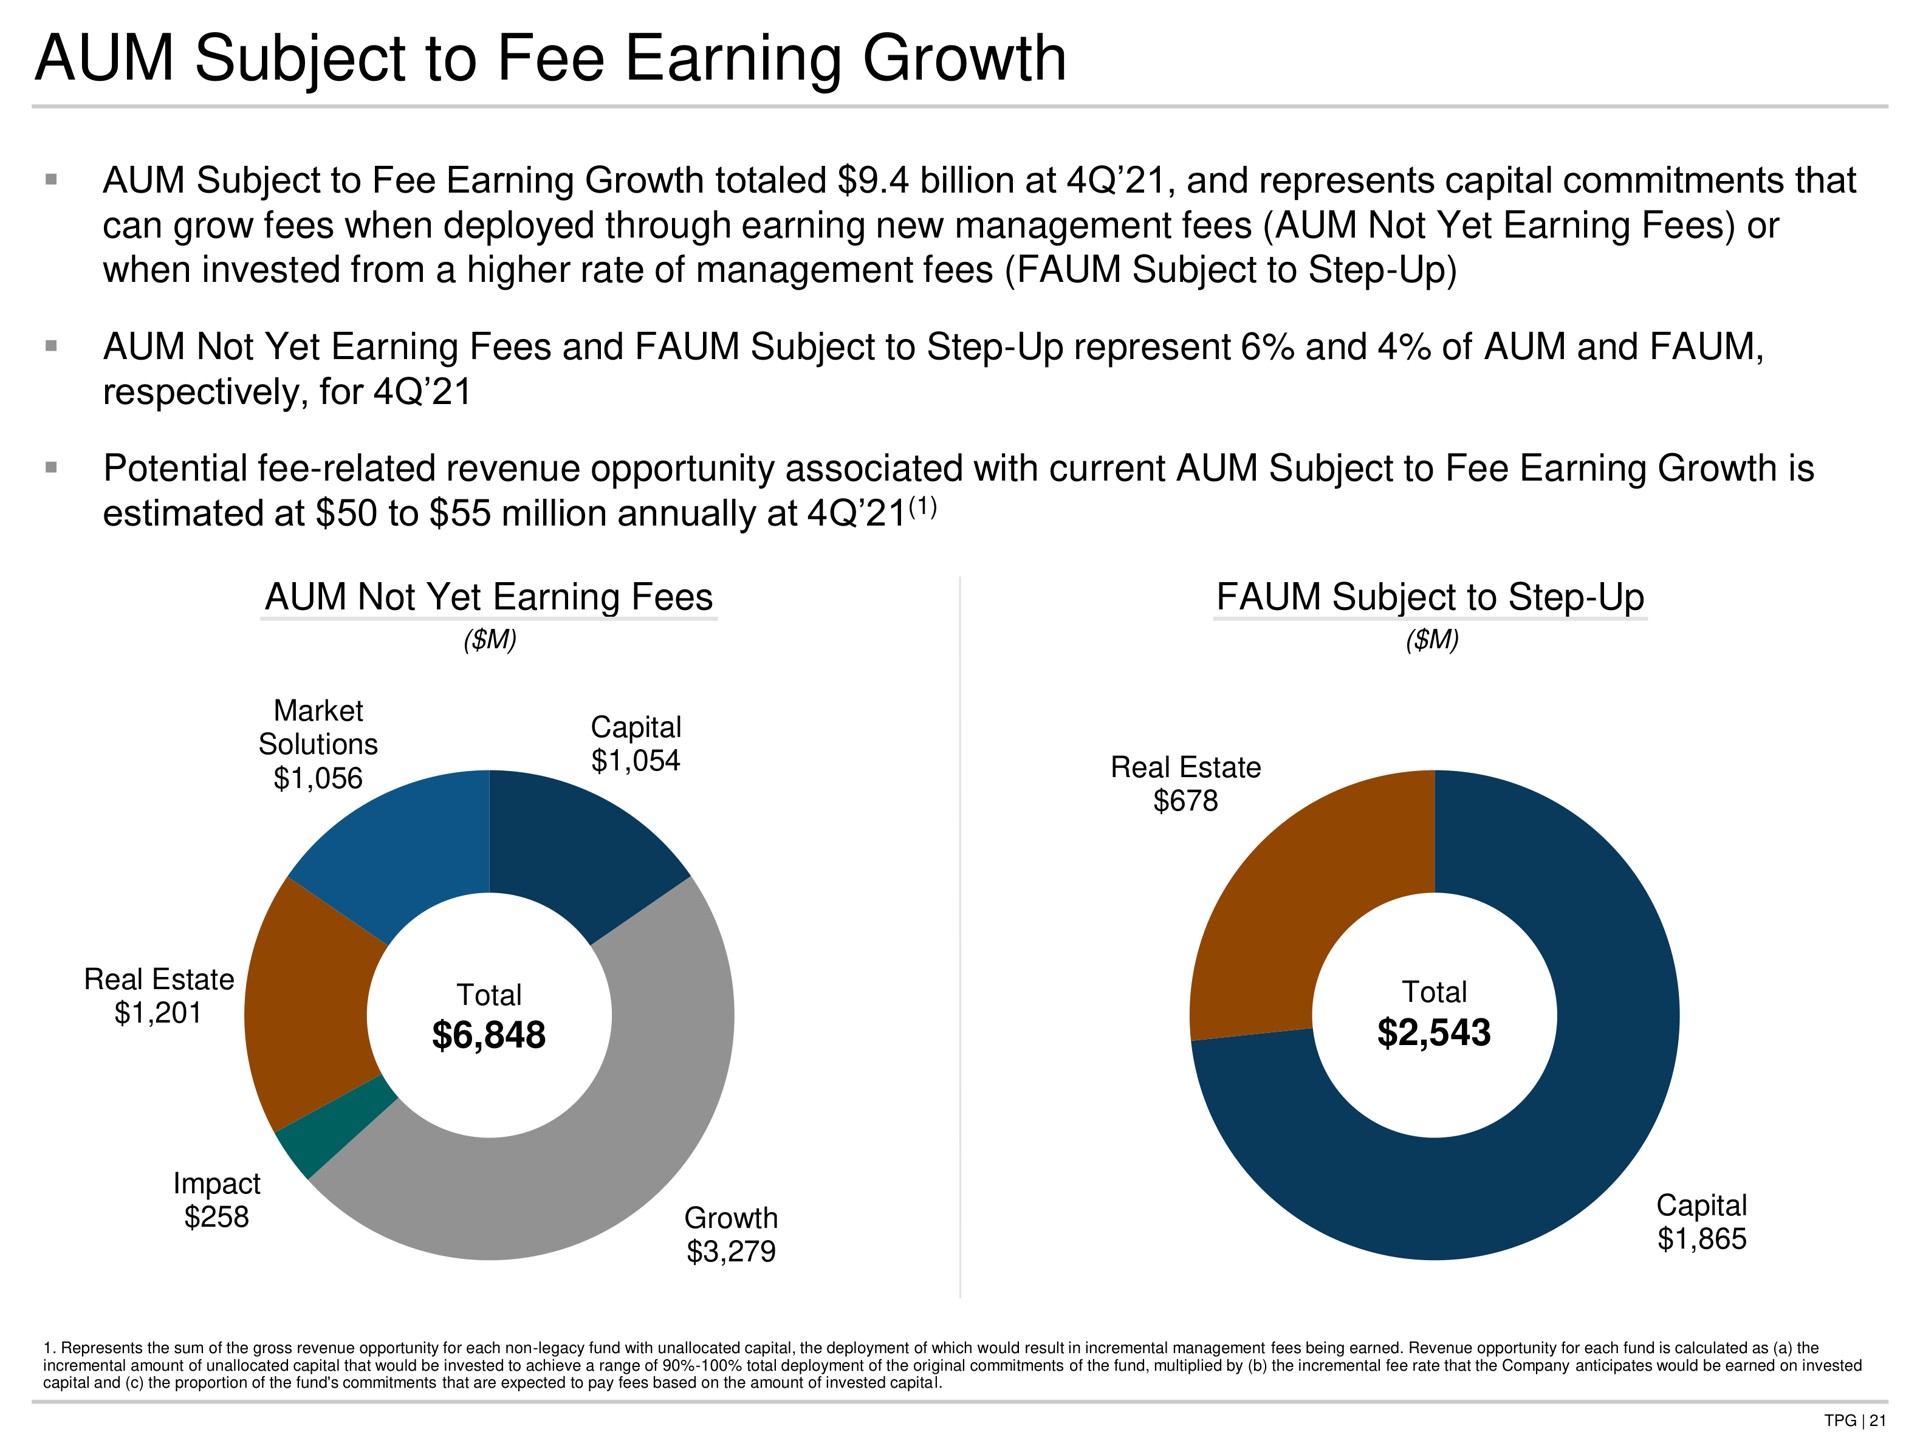 aum subject to fee earning growth aum subject to fee earning growth totaled billion at and represents capital commitments that can grow fees when deployed through earning new management fees aum not yet earning fees or when invested from a higher rate of management fees subject to step up aum not yet earning fees and subject to step up represent and of aum and respectively for potential fee related revenue opportunity associated with current aum subject to fee earning growth is estimated at to million annually at aum not yet earning fees subject to step up areas real estate | TPG